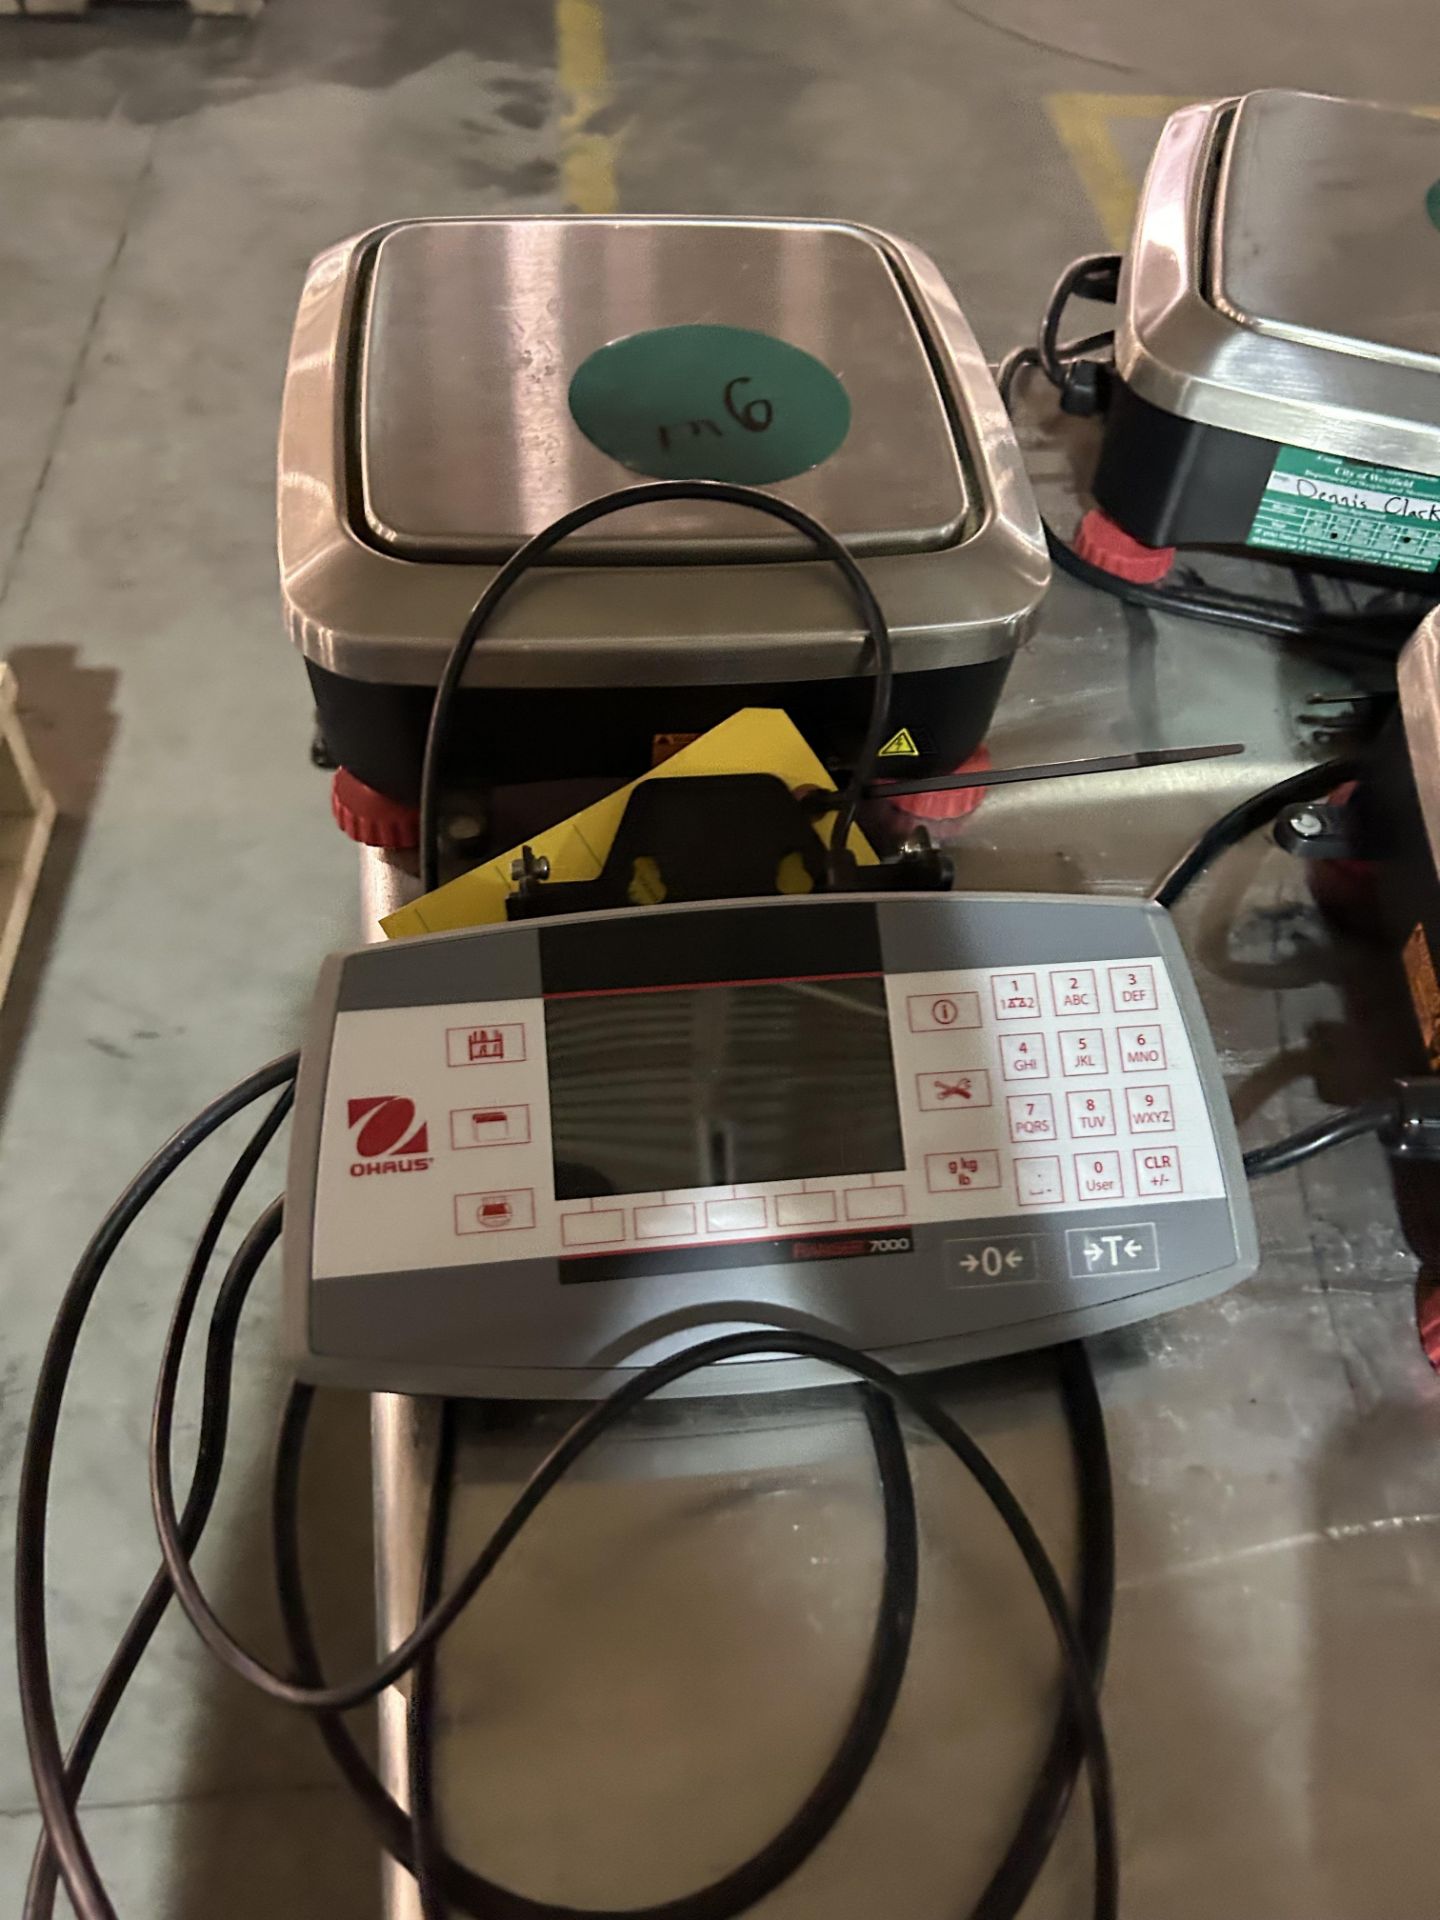 (Located in Quincy, FL) Ohaus Scale Ranger 7000, Model #R71MHD6, S/N C010104886